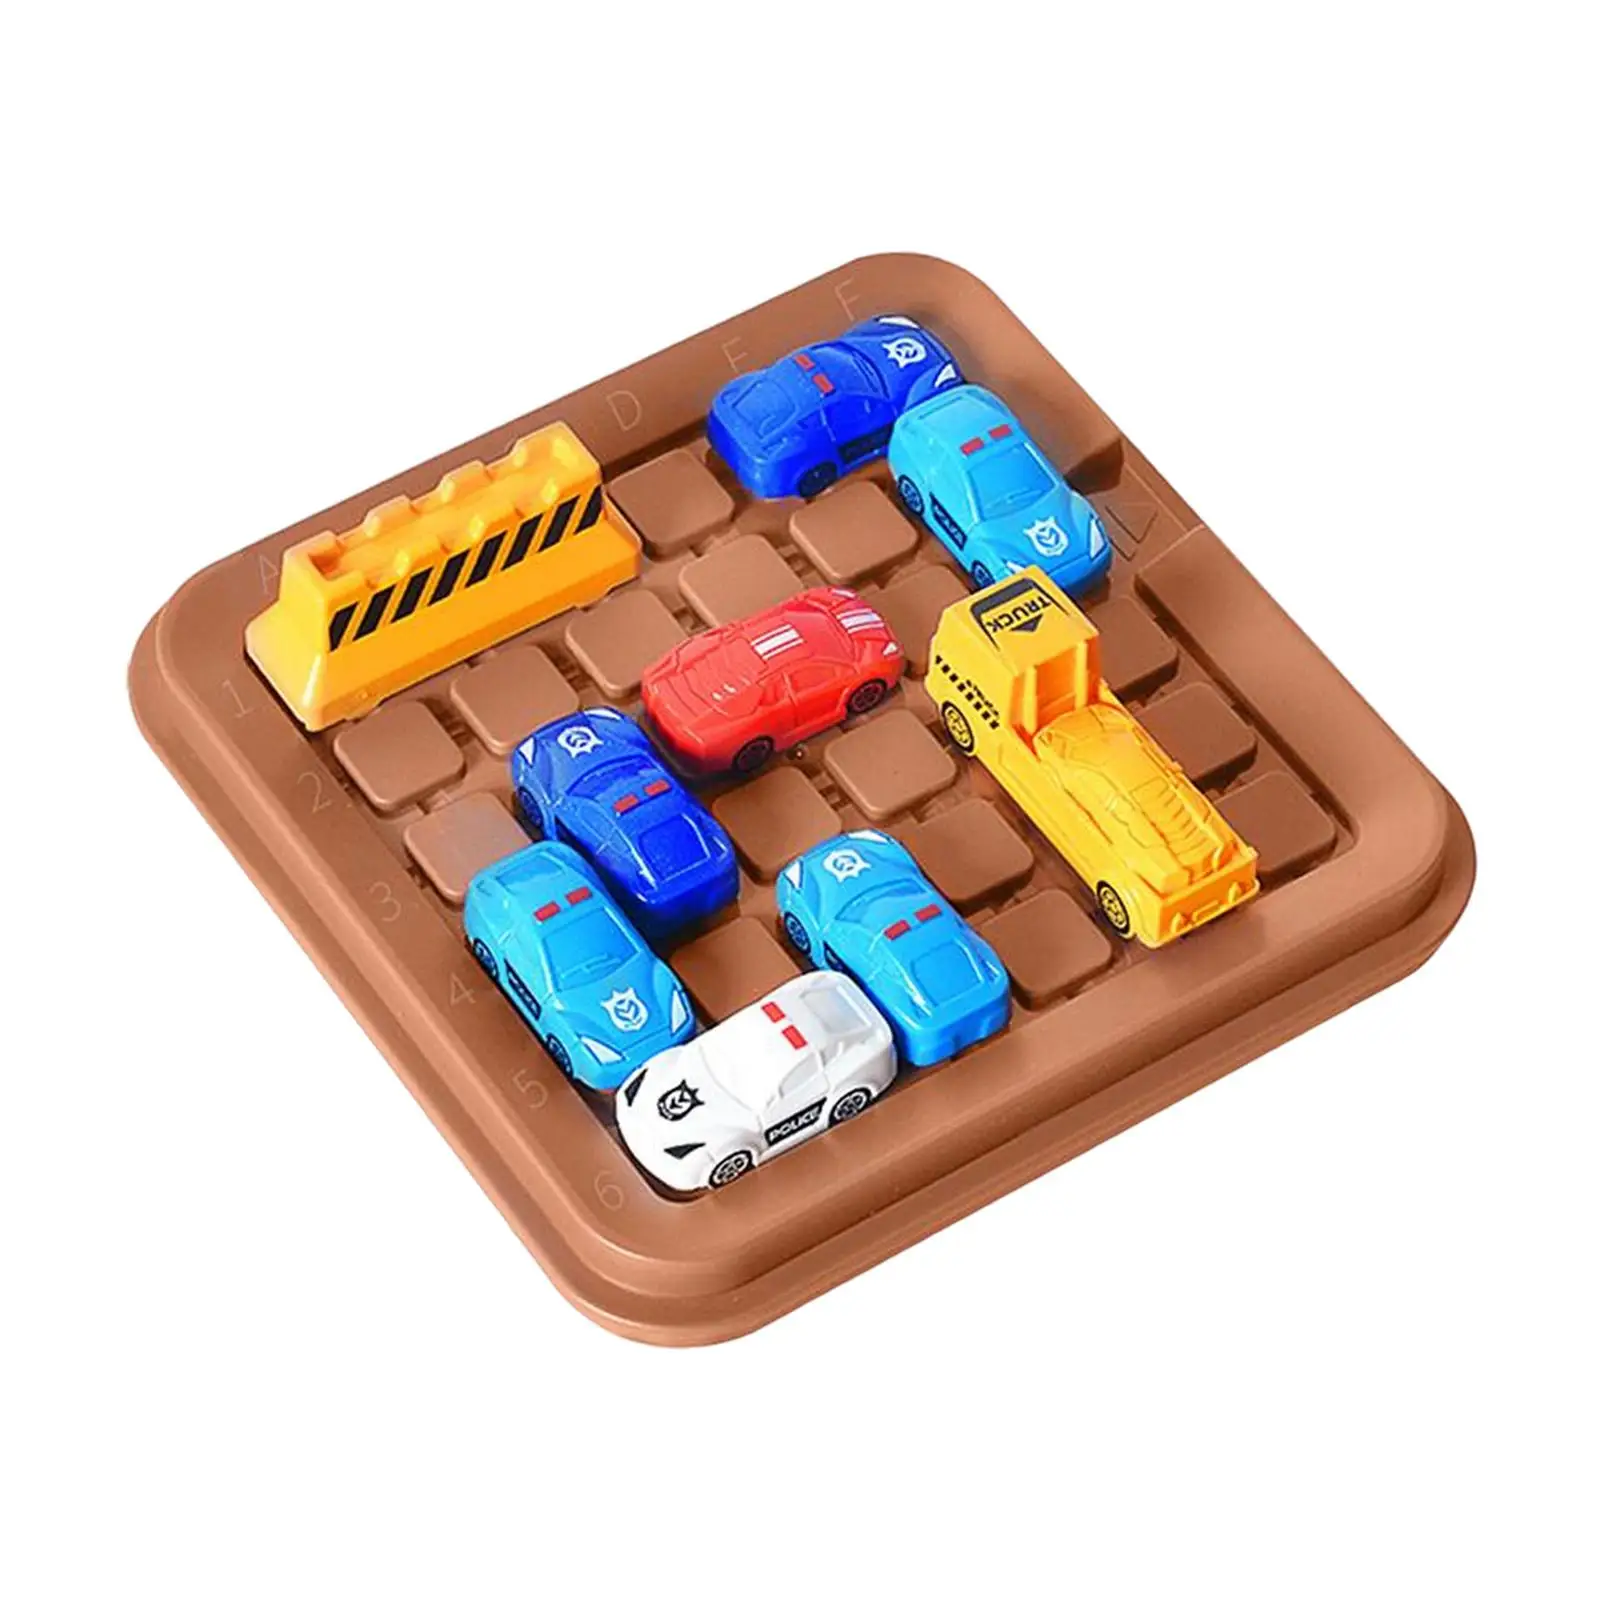 Montessori Slide Puzzle Games Educational Toys Intellectual Development Toys Parent Child Kids Gift Travel Games Fun for Travel